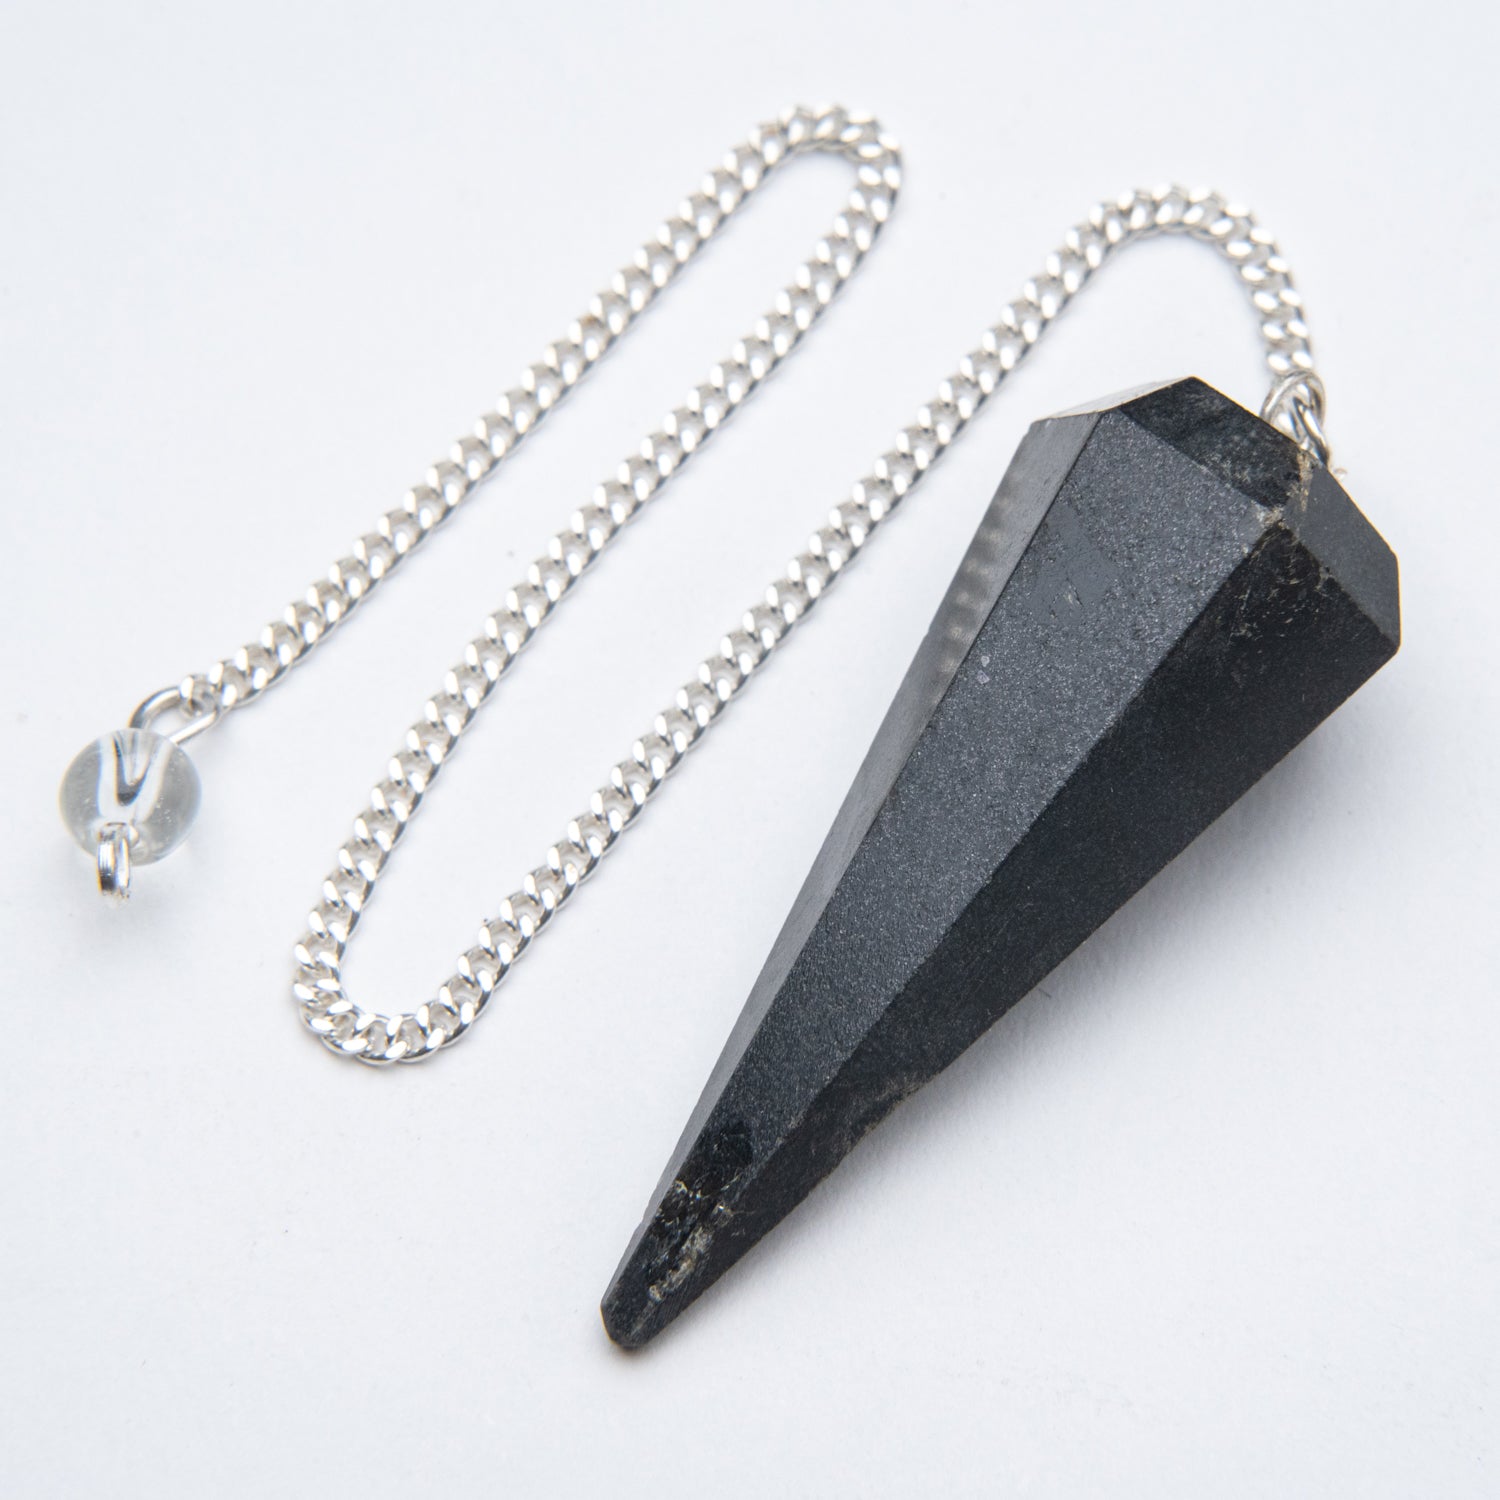 Genuine Polished Black Tourmaline Pendulum (with Chain) with black velvet pouch